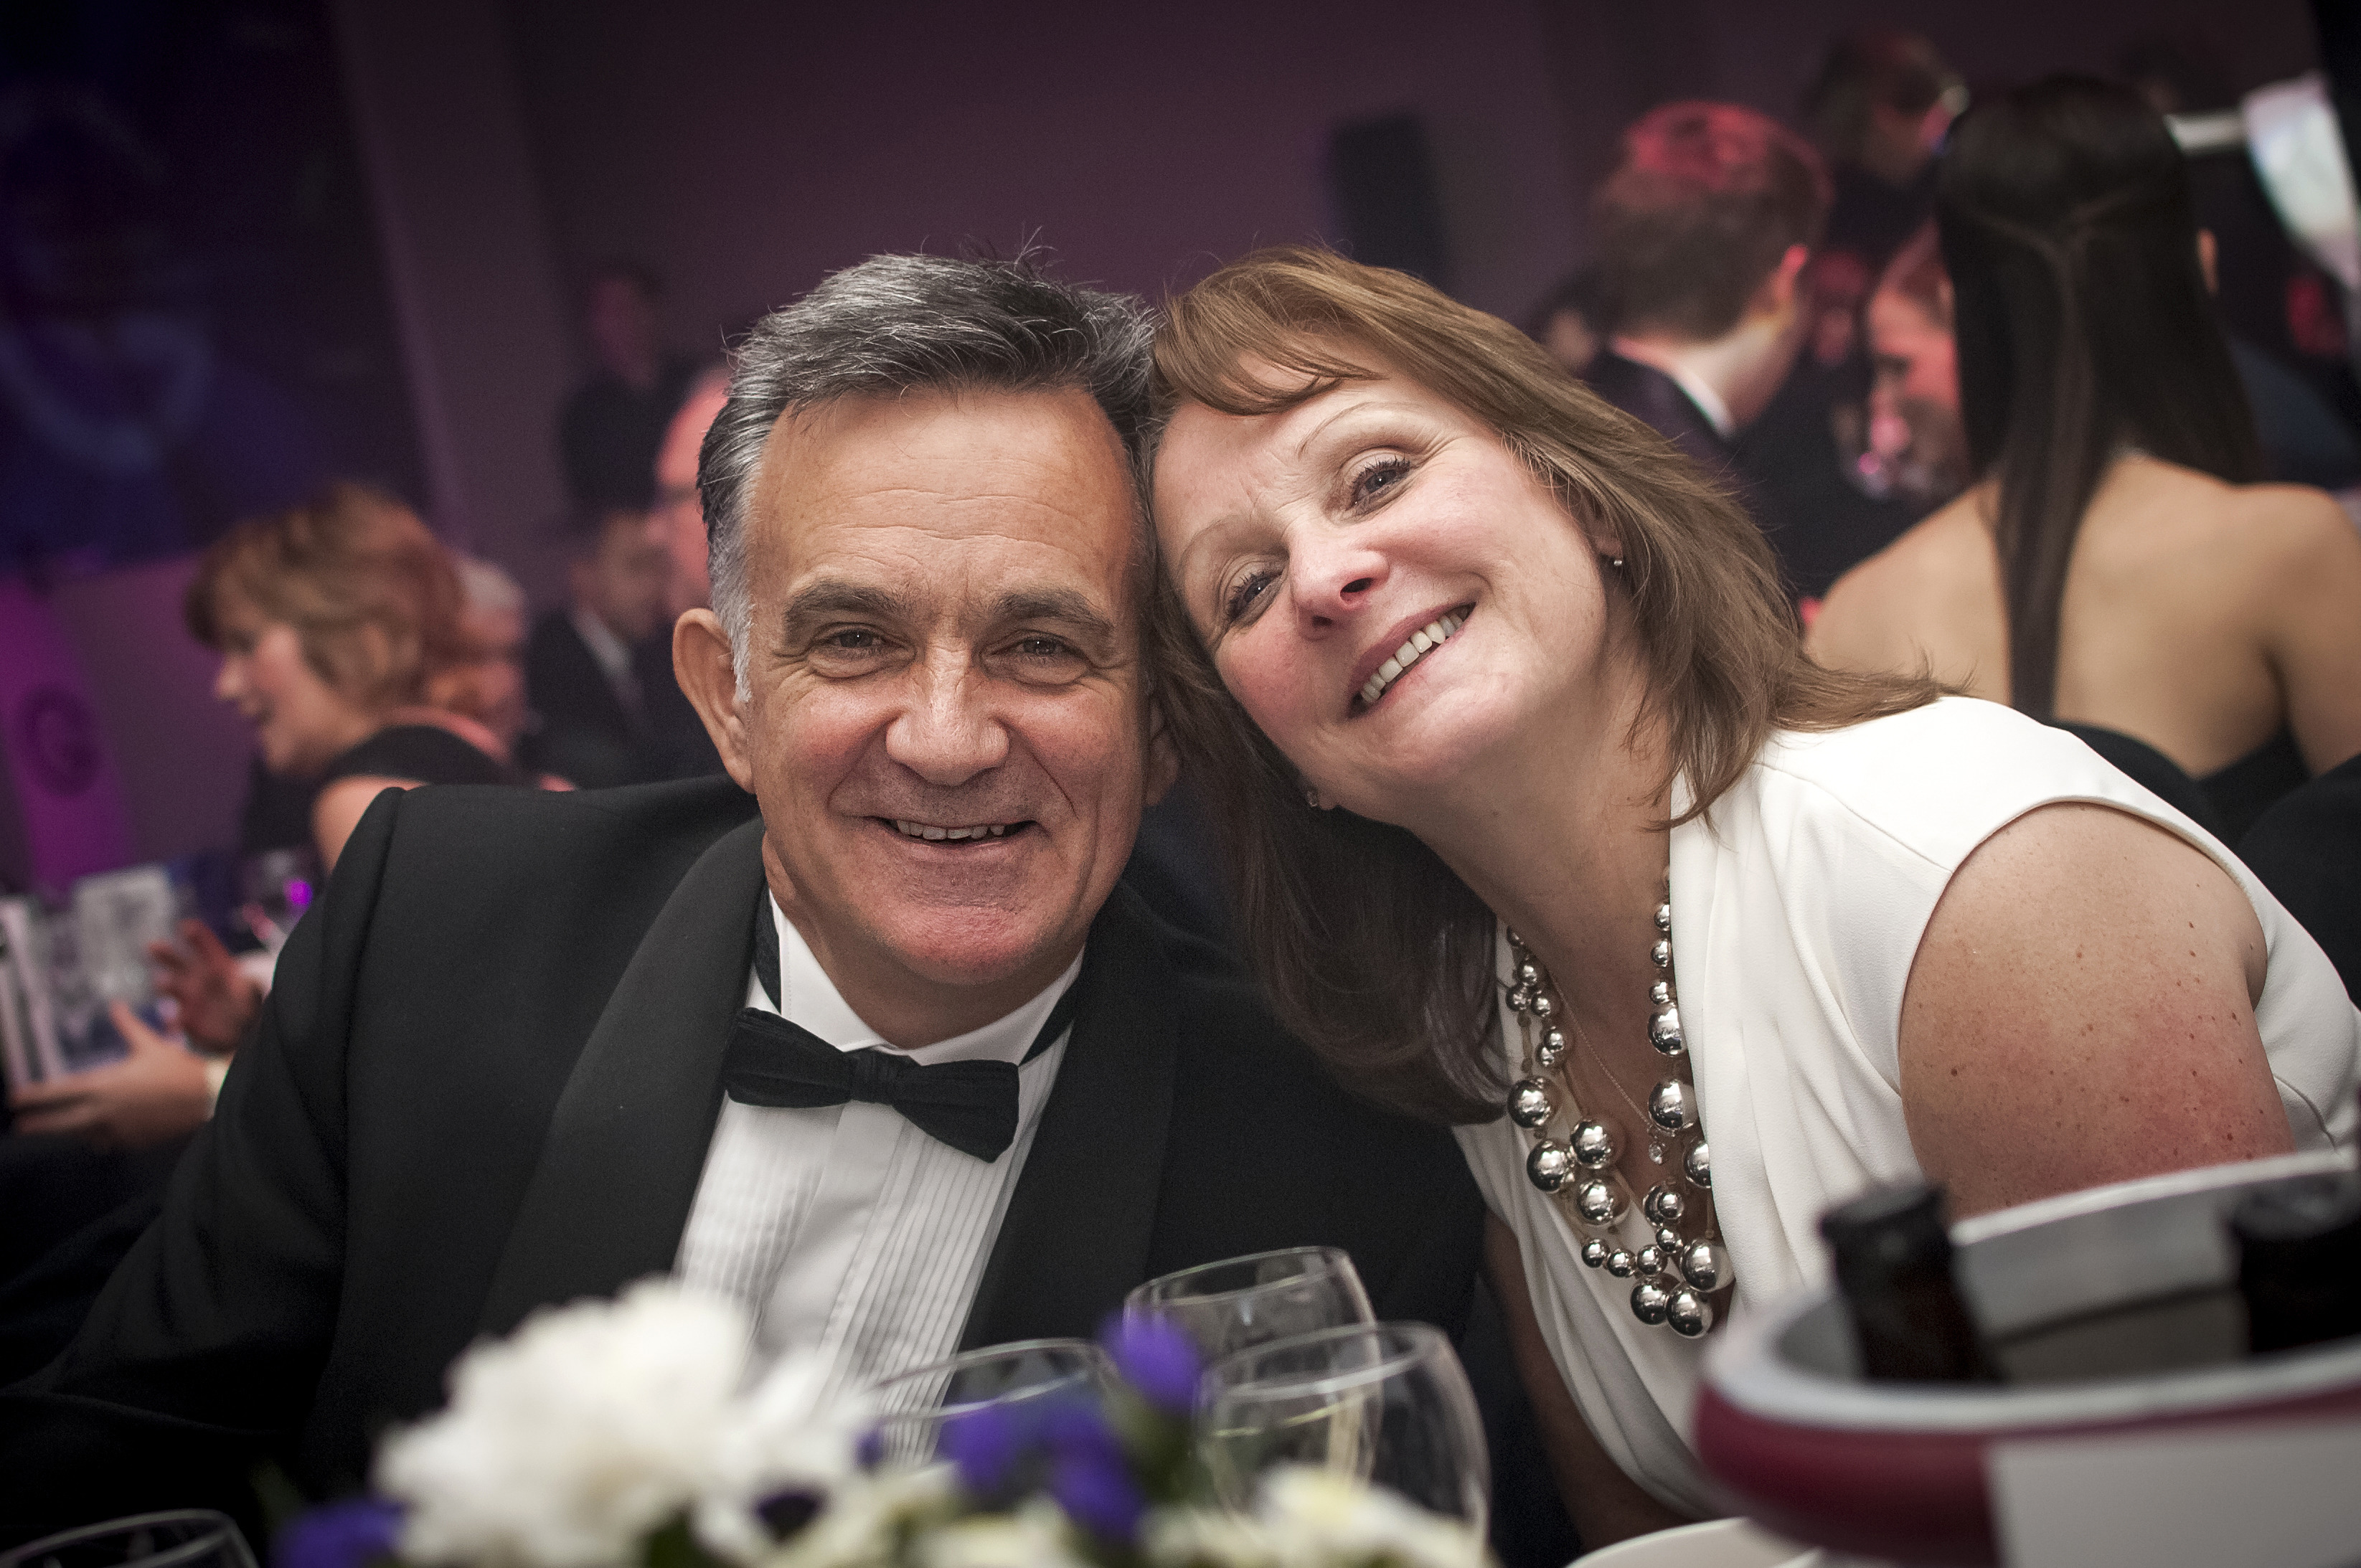 PerryGolf's Anne Filshie joins PerryGolf Co-Founder, Colin Dalgleish, in celebrating his receipt of a Special Recognition award at the 2015 Scottish Golf Tourism Awards